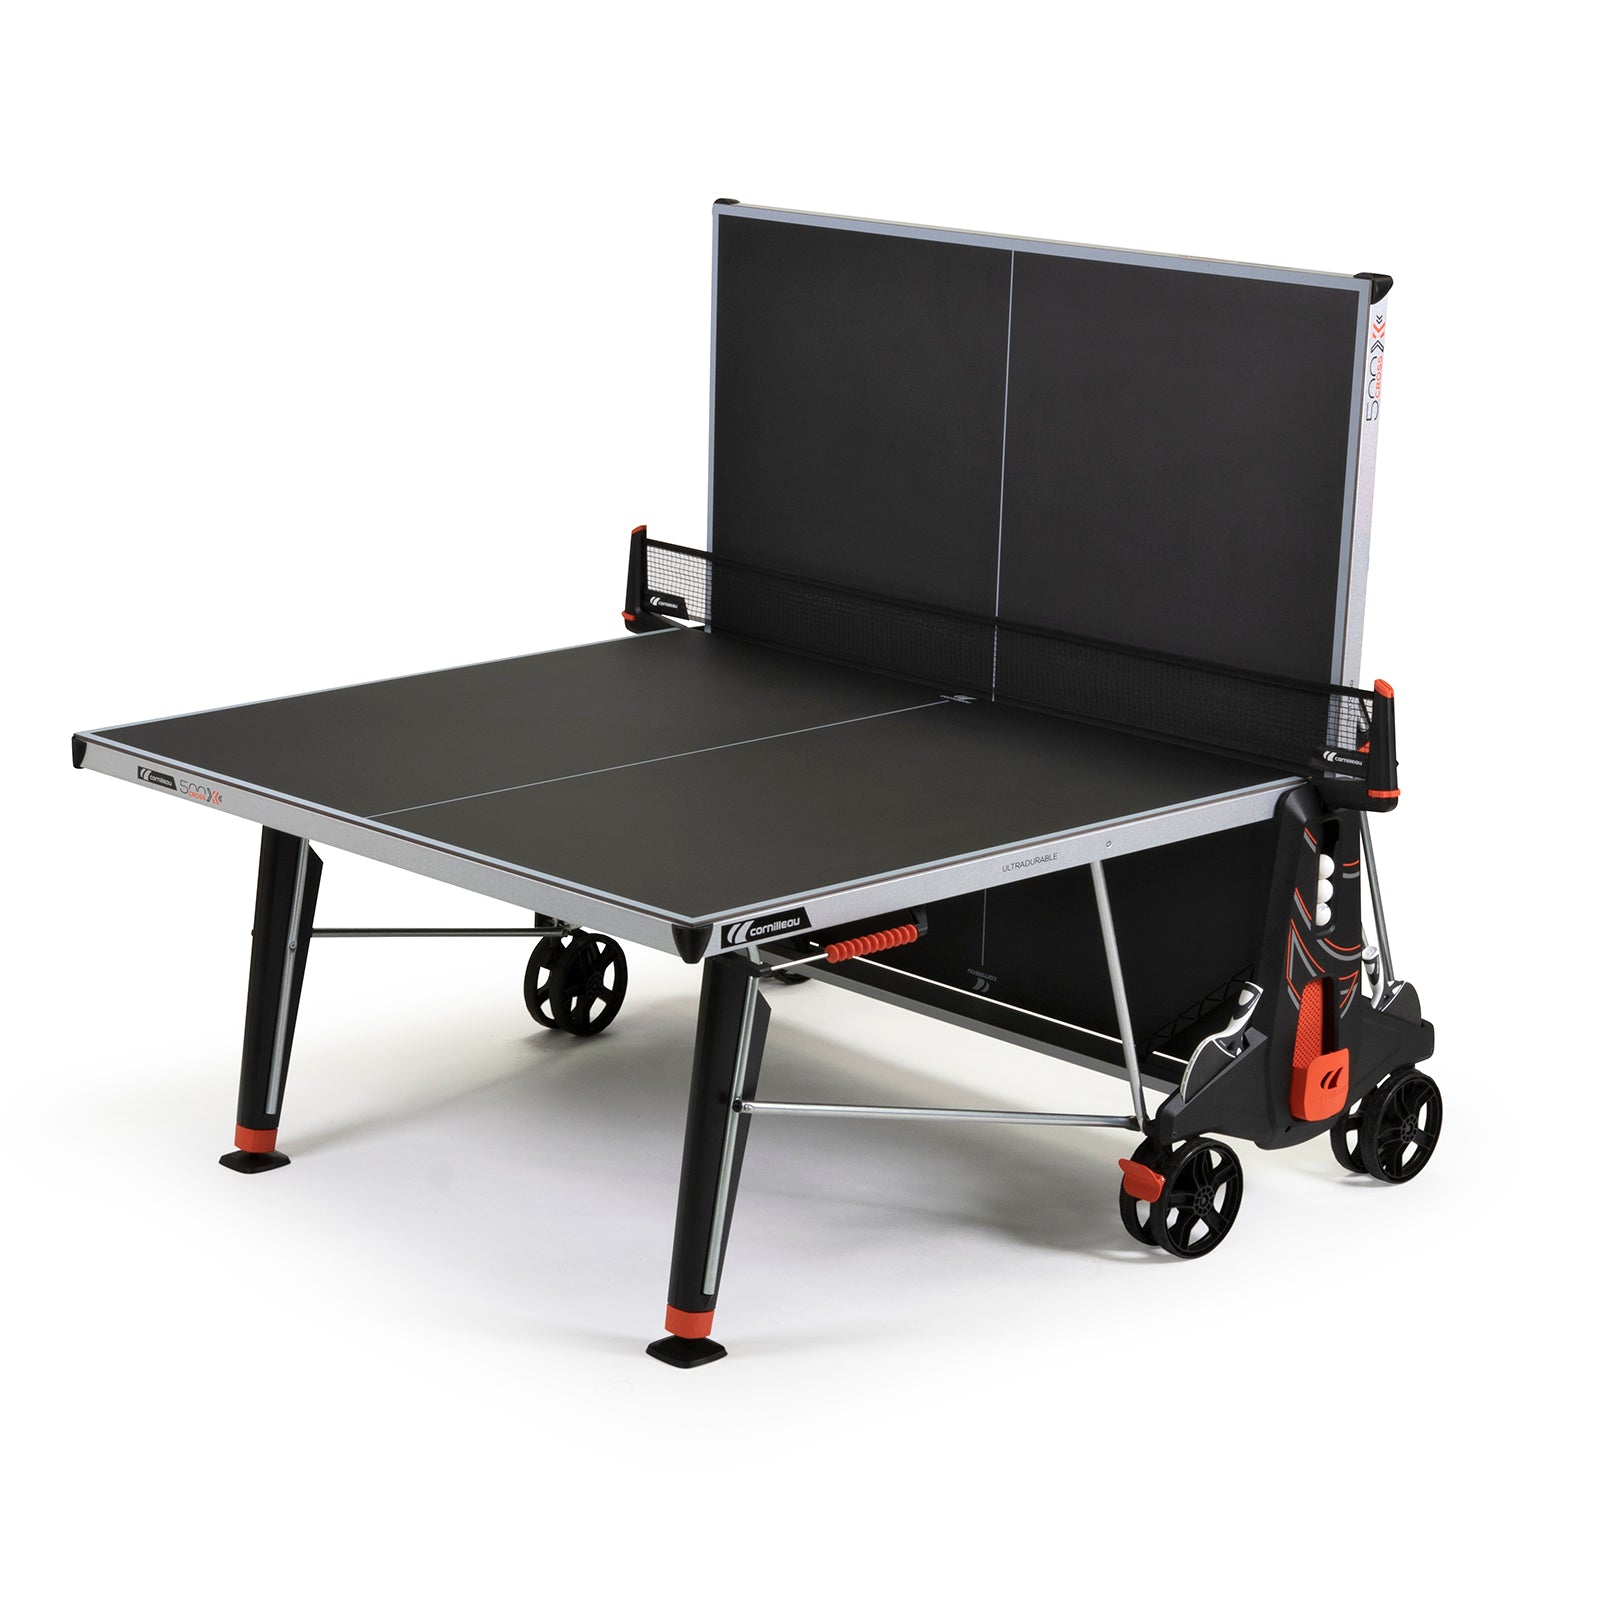 Cornilleau 500X Performance Black Outdoor Table Tennis Table